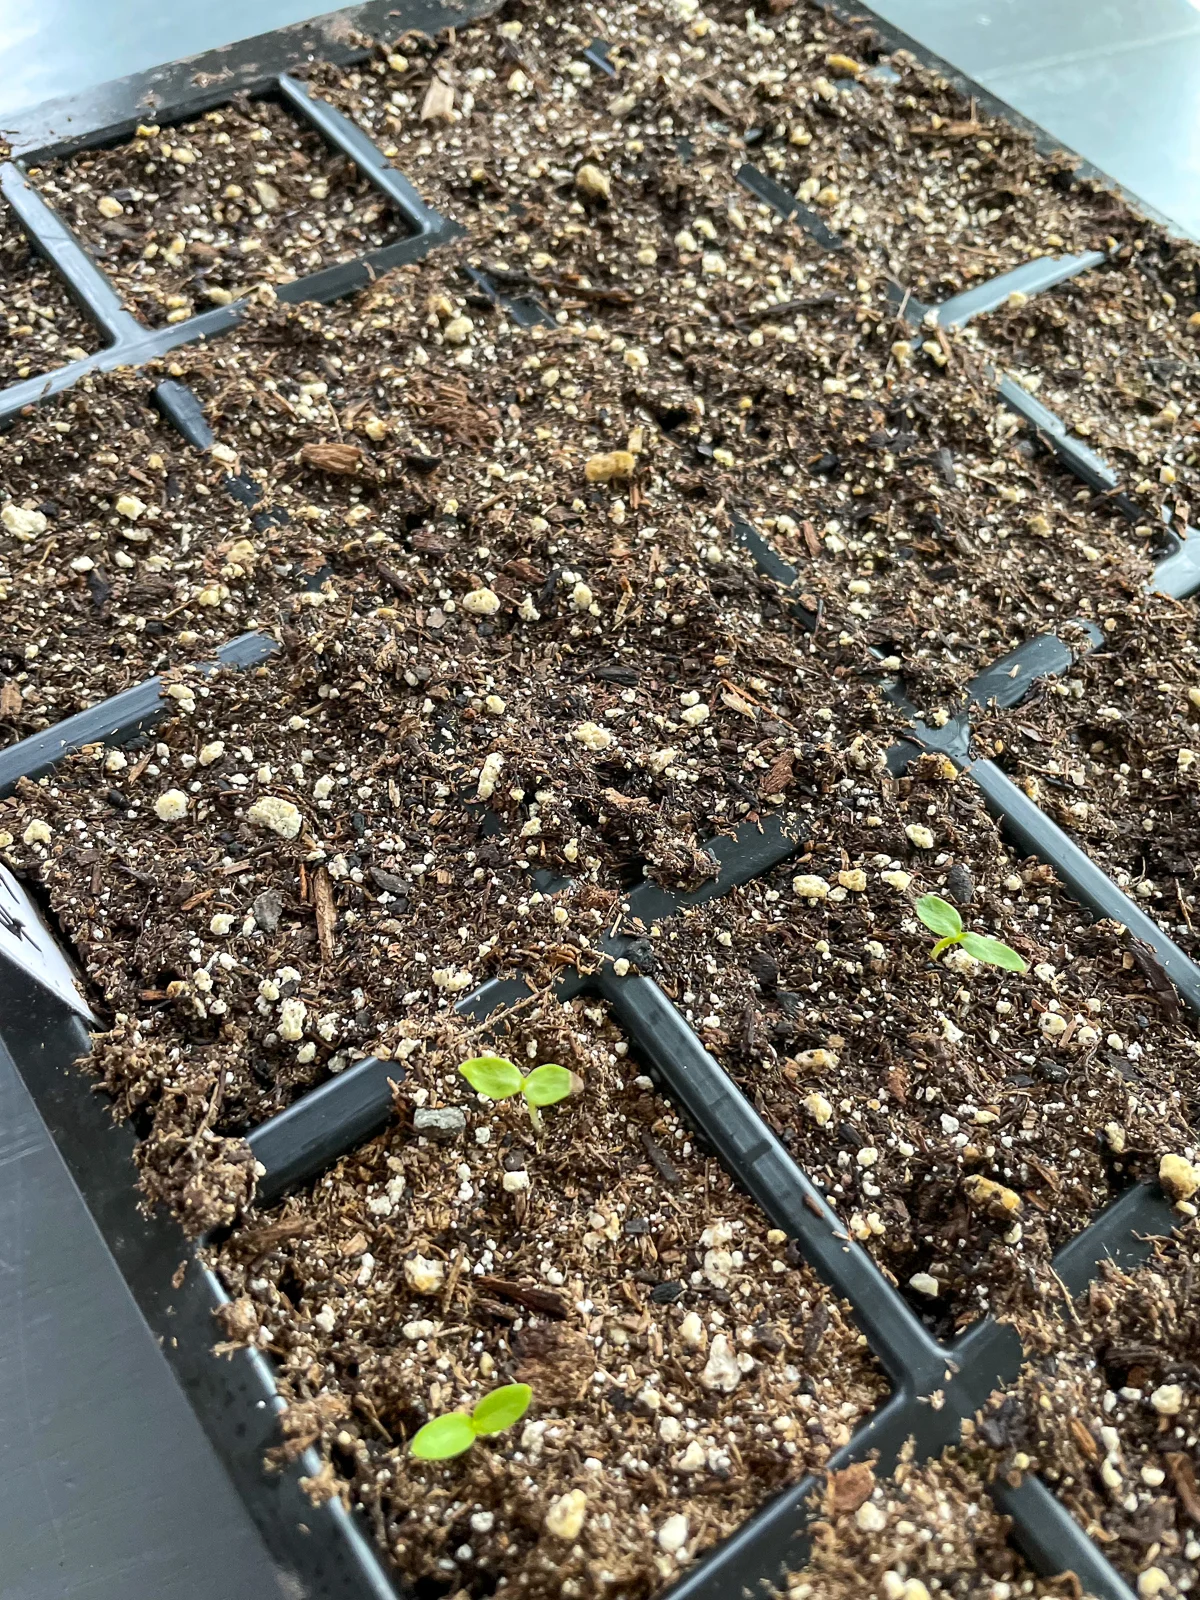 half of a tray of phlox seeds germinated while the other half didn't